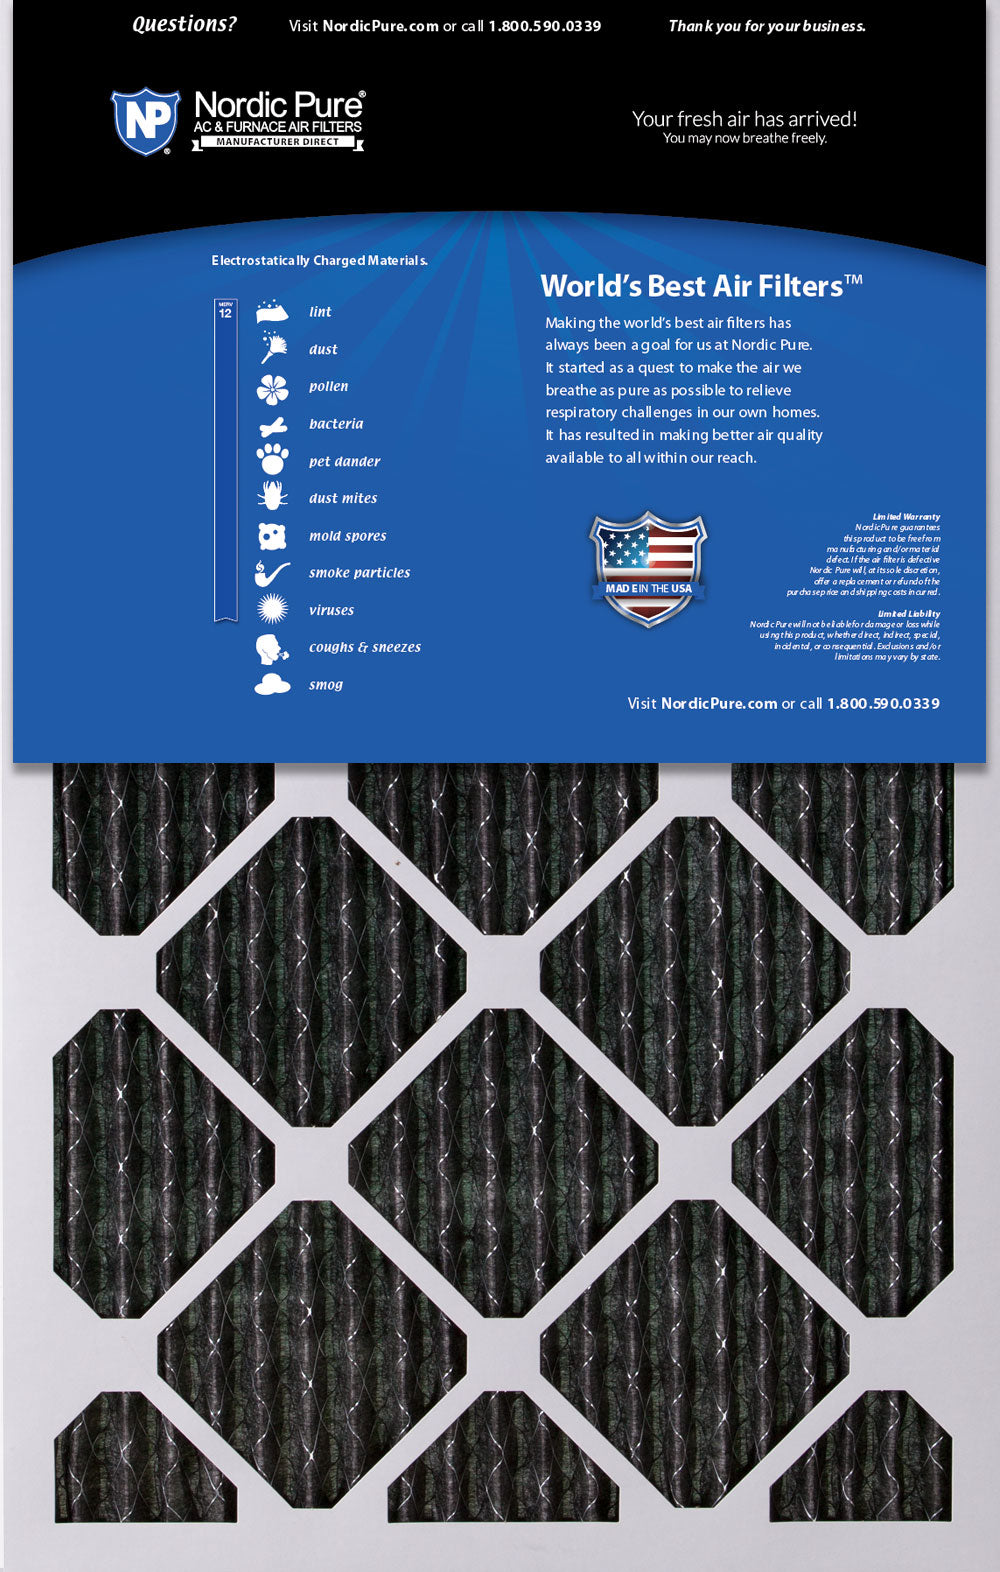 10x20x1 Furnace Air Filters MERV 12 Pleated Plus Carbon